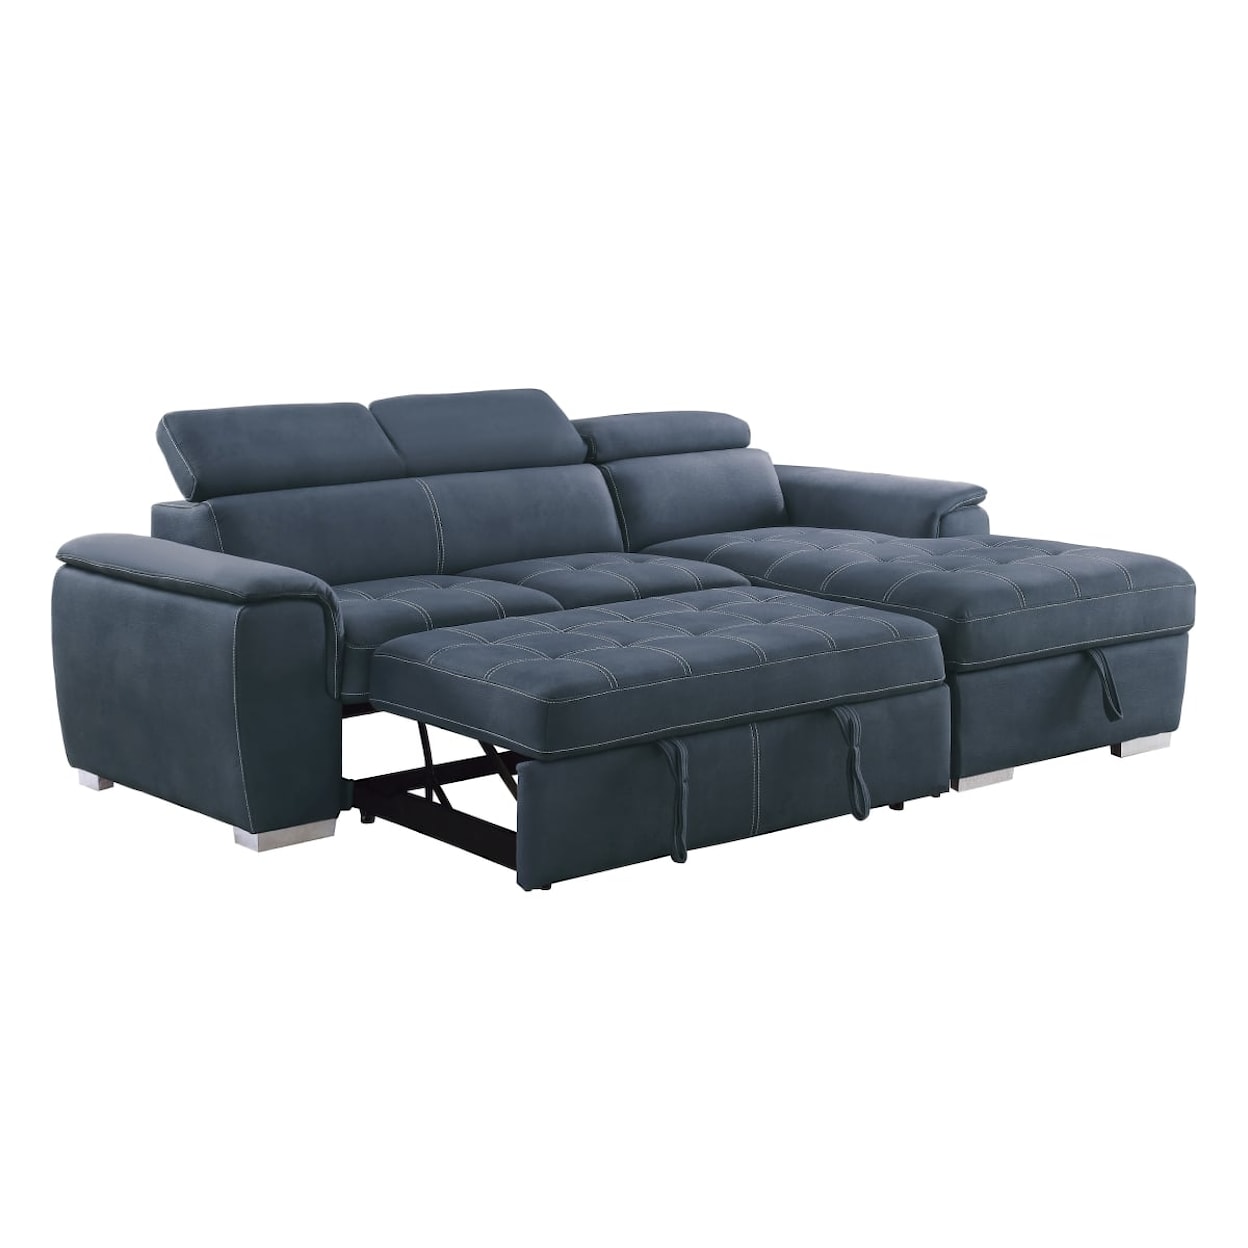 Homelegance Ferriday 2-Piece Sectional Sofa